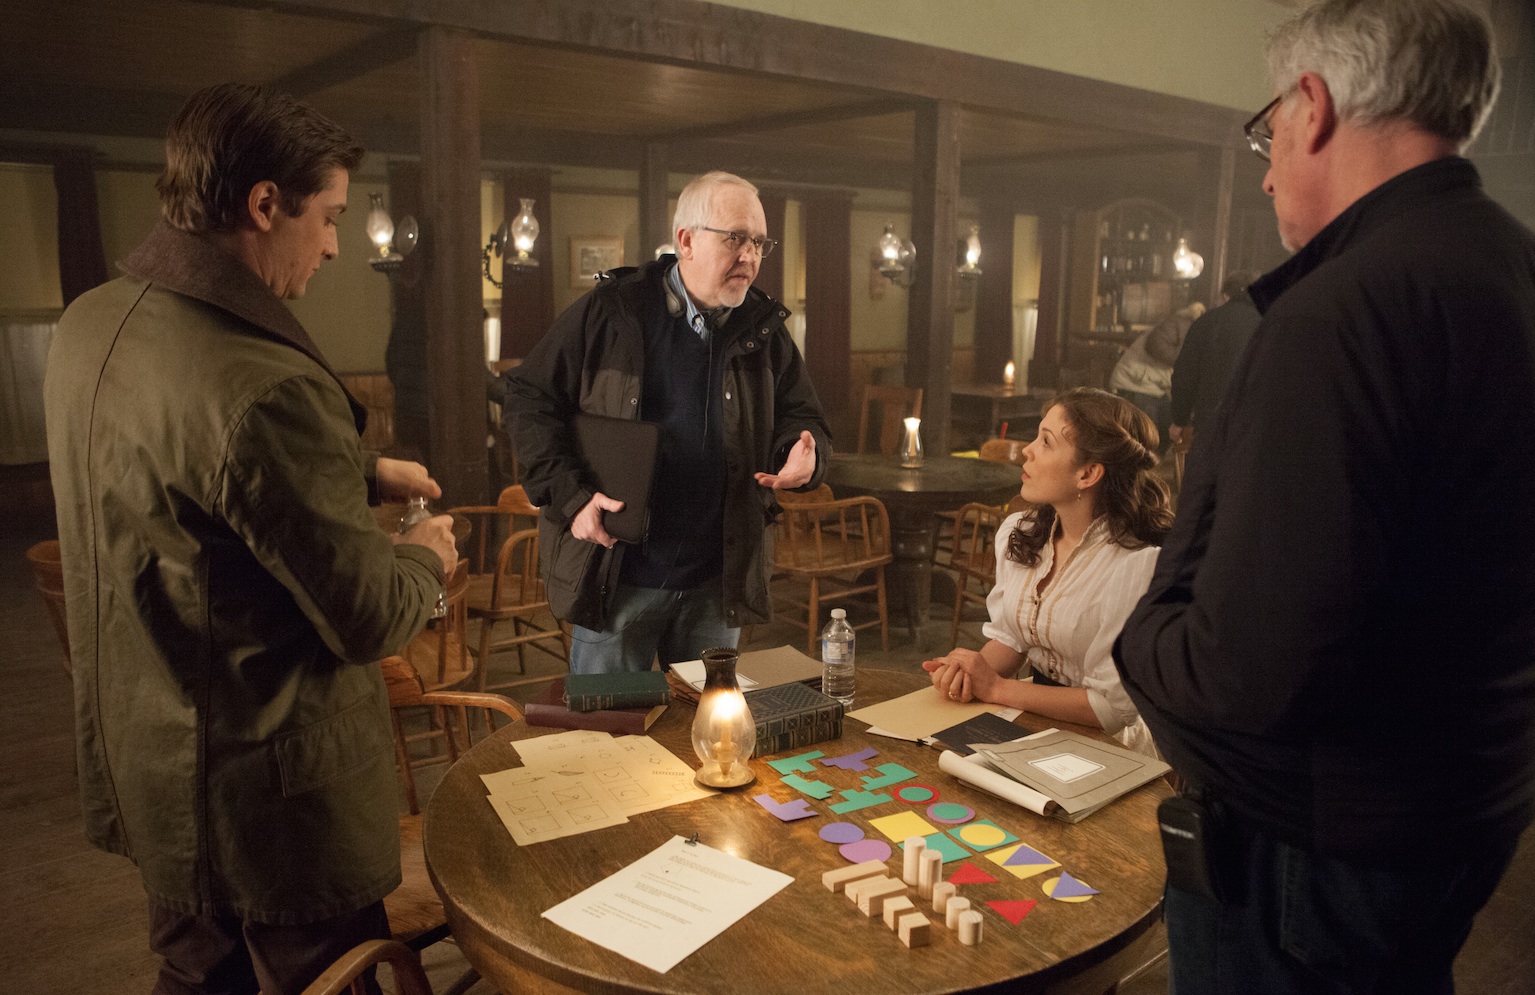 Executive Producer and head writer Brian Bird discussing script with actors Daniel Lissing and Erin Krakow, and director Neill Fearnley